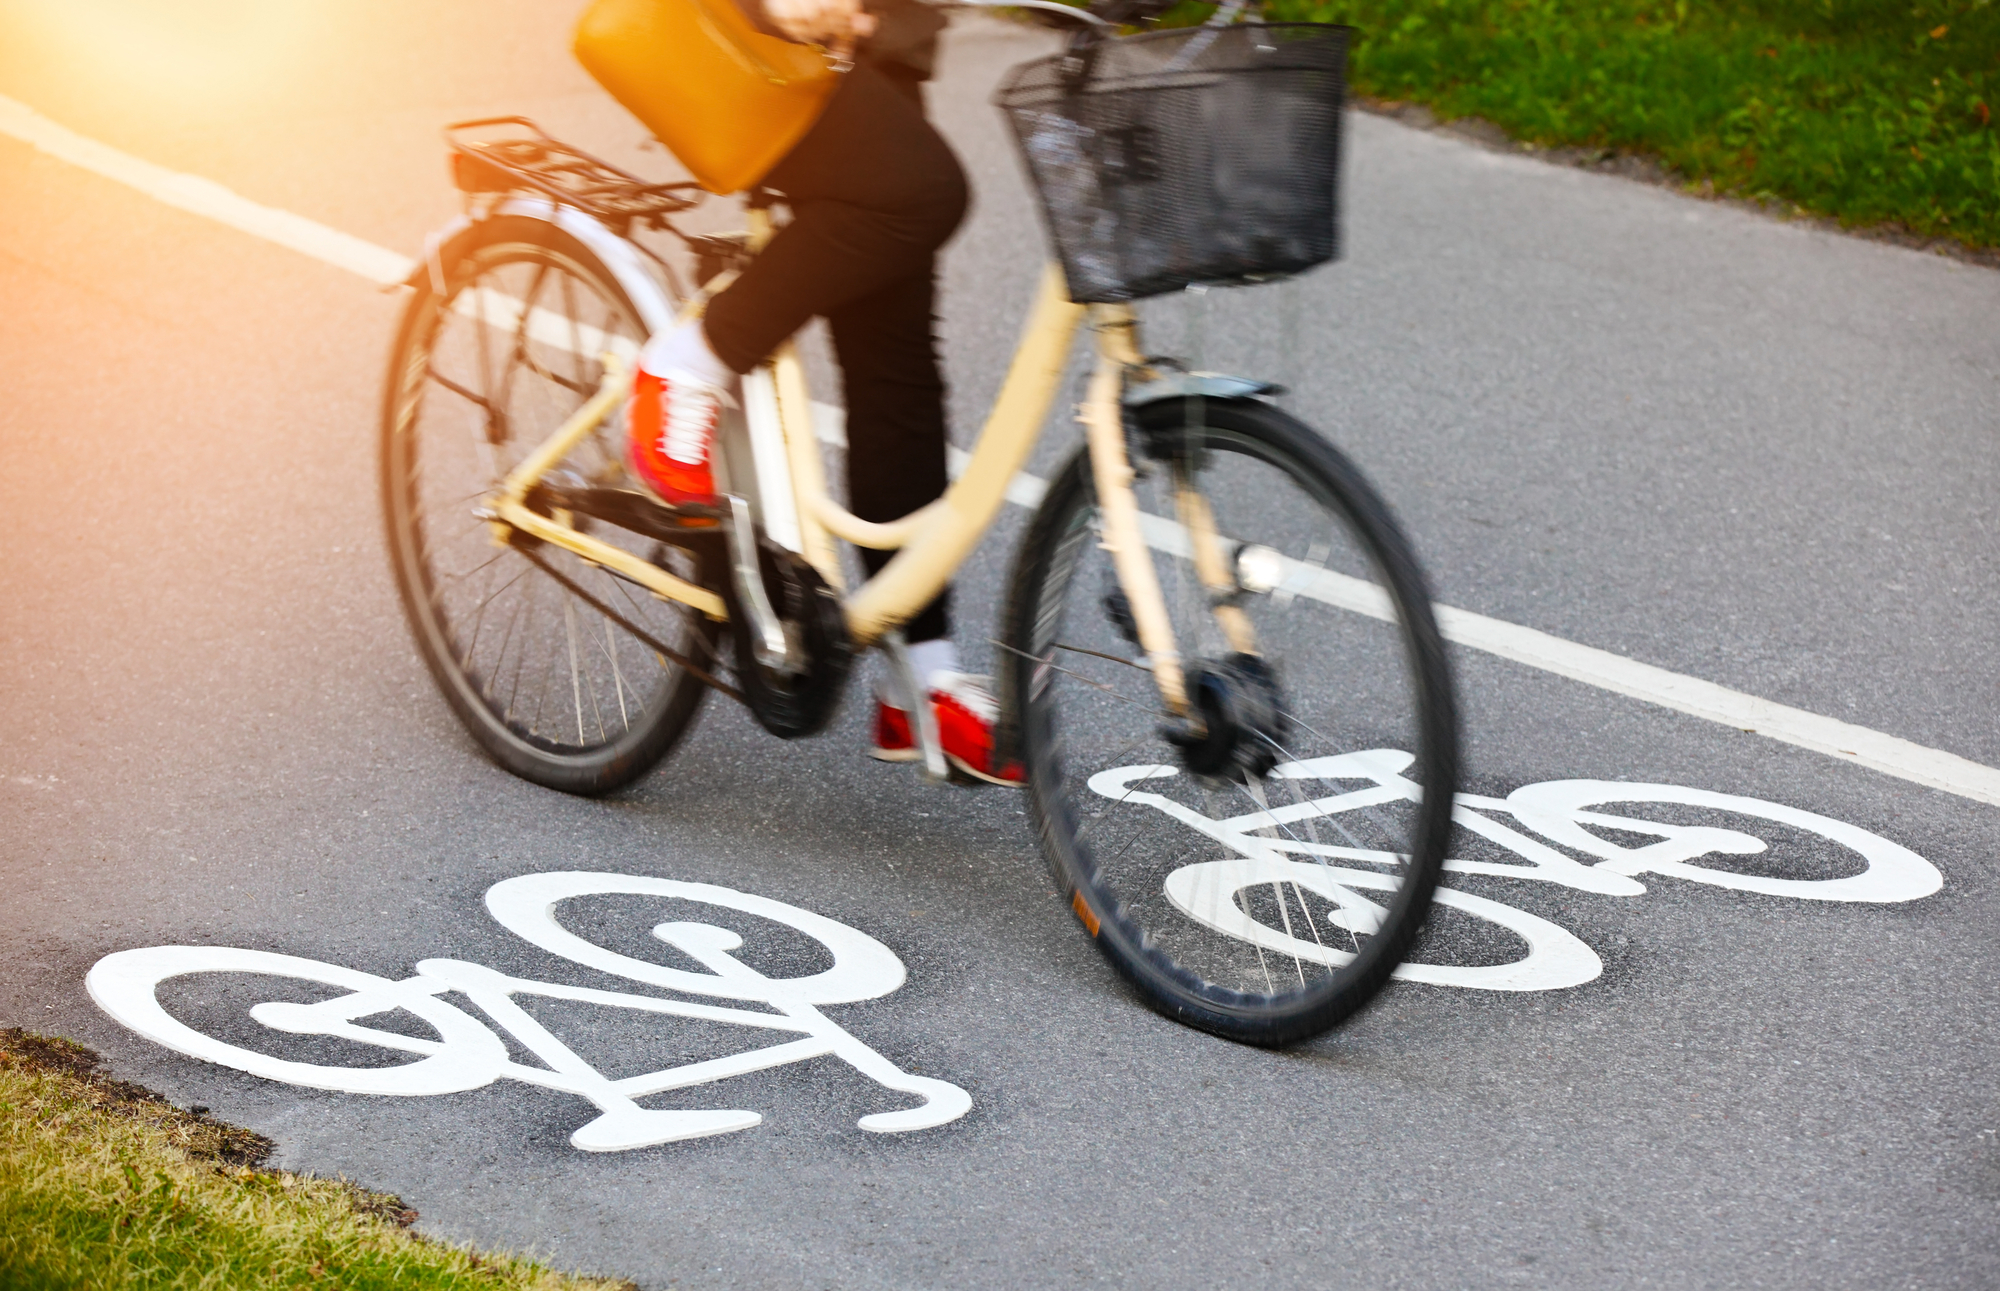 Do You Need A Bicycle Accident Lawyer?